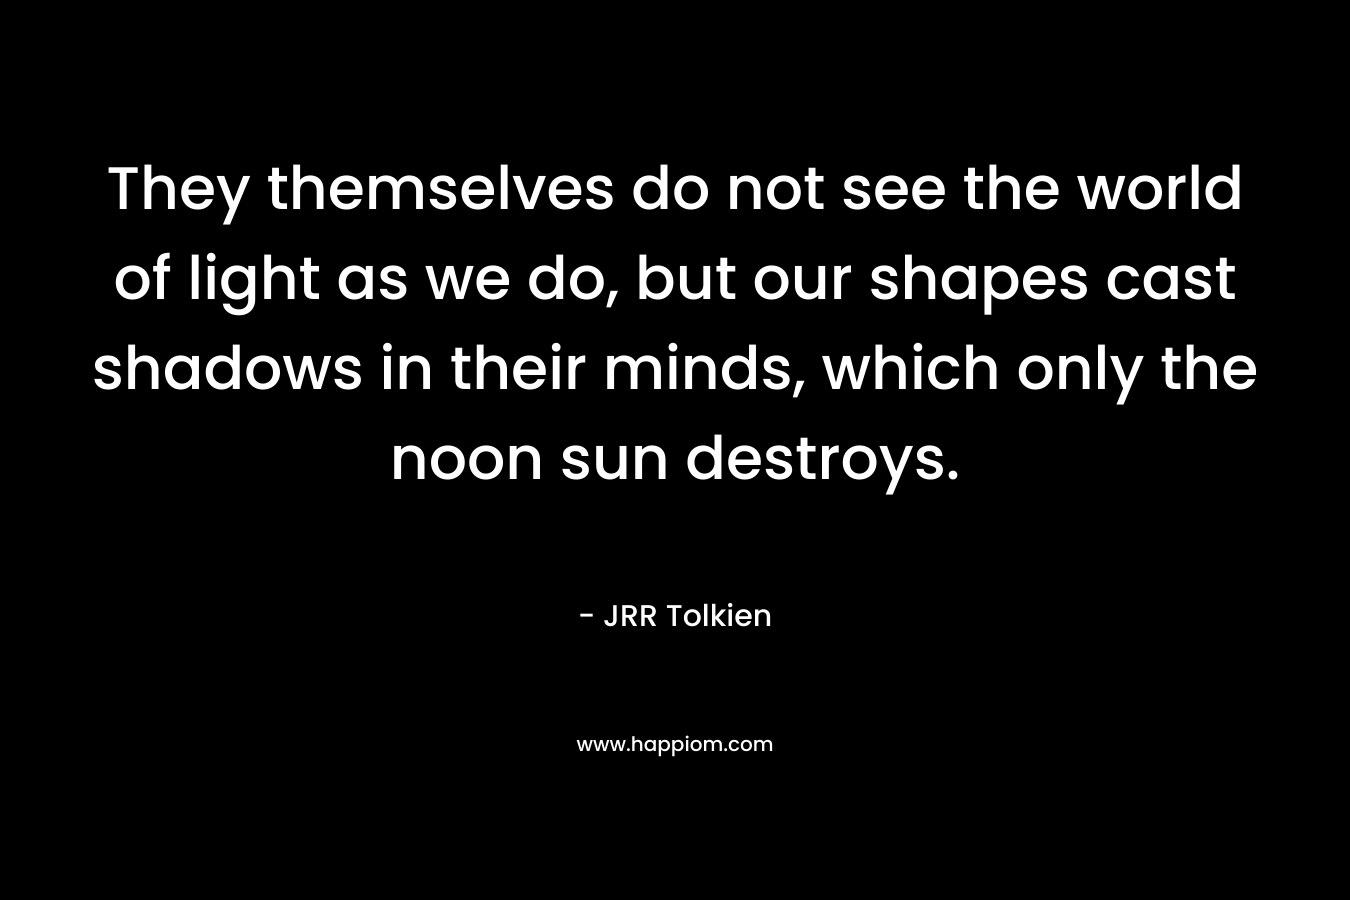 They themselves do not see the world of light as we do, but our shapes cast shadows in their minds, which only the noon sun destroys.